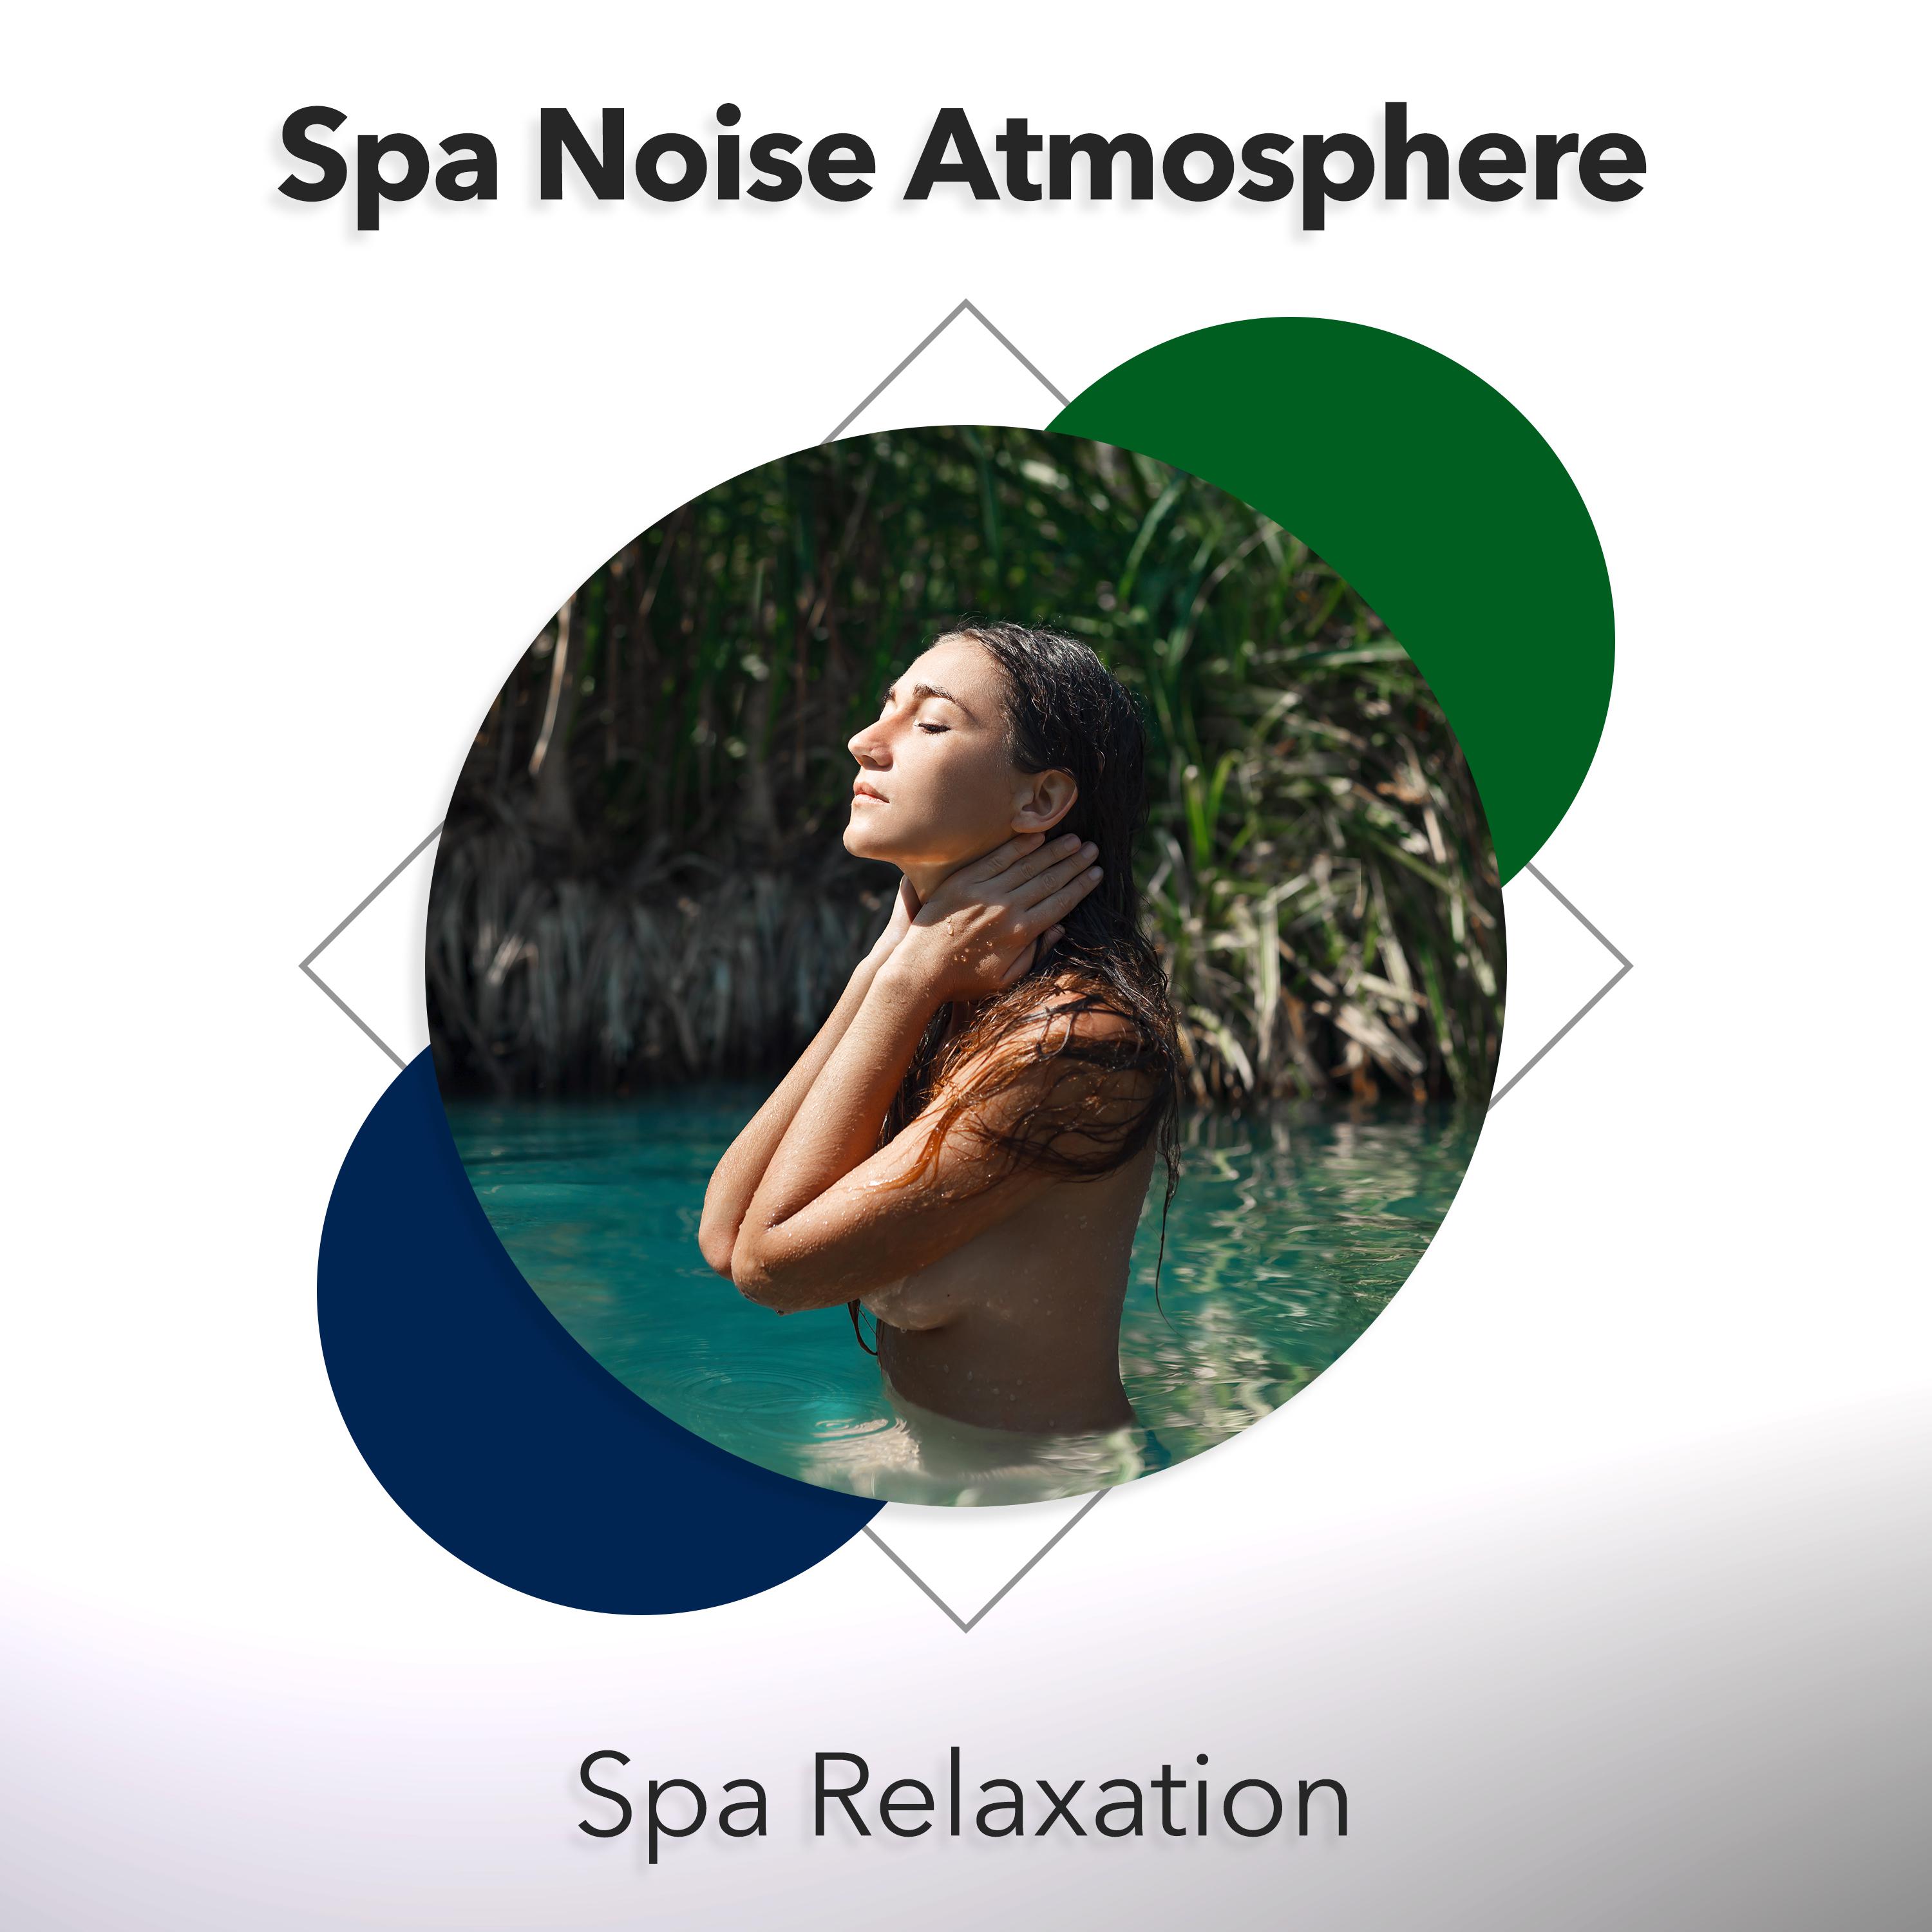 Spa Noise Atmosphere